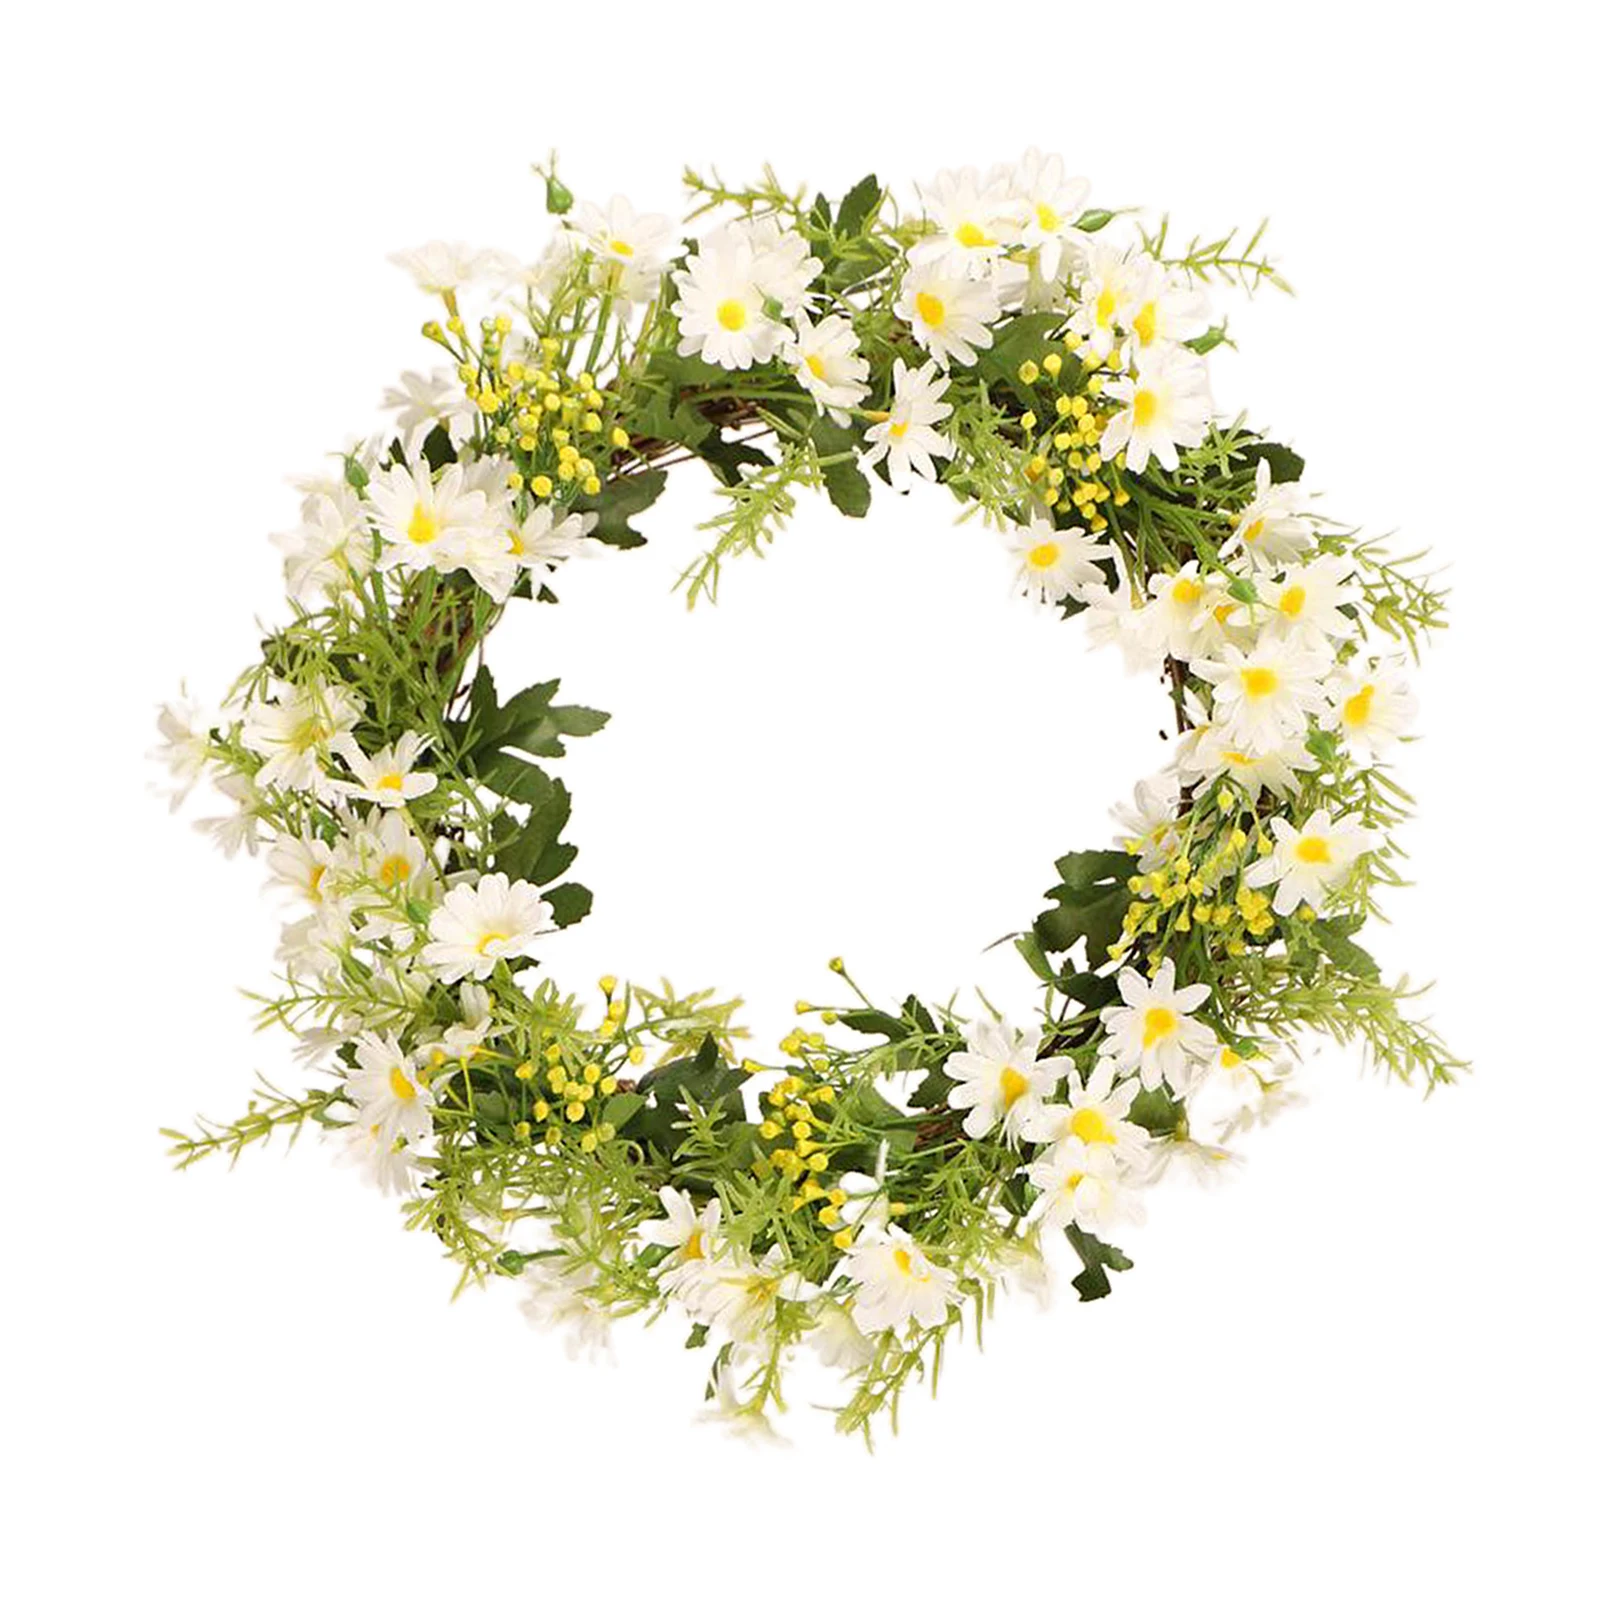 Artificial Floral Wreath, Silk Daisy Wreath Autumn Wildflowers Wreath for Front Door Wall Window Decor and Festival Celebration